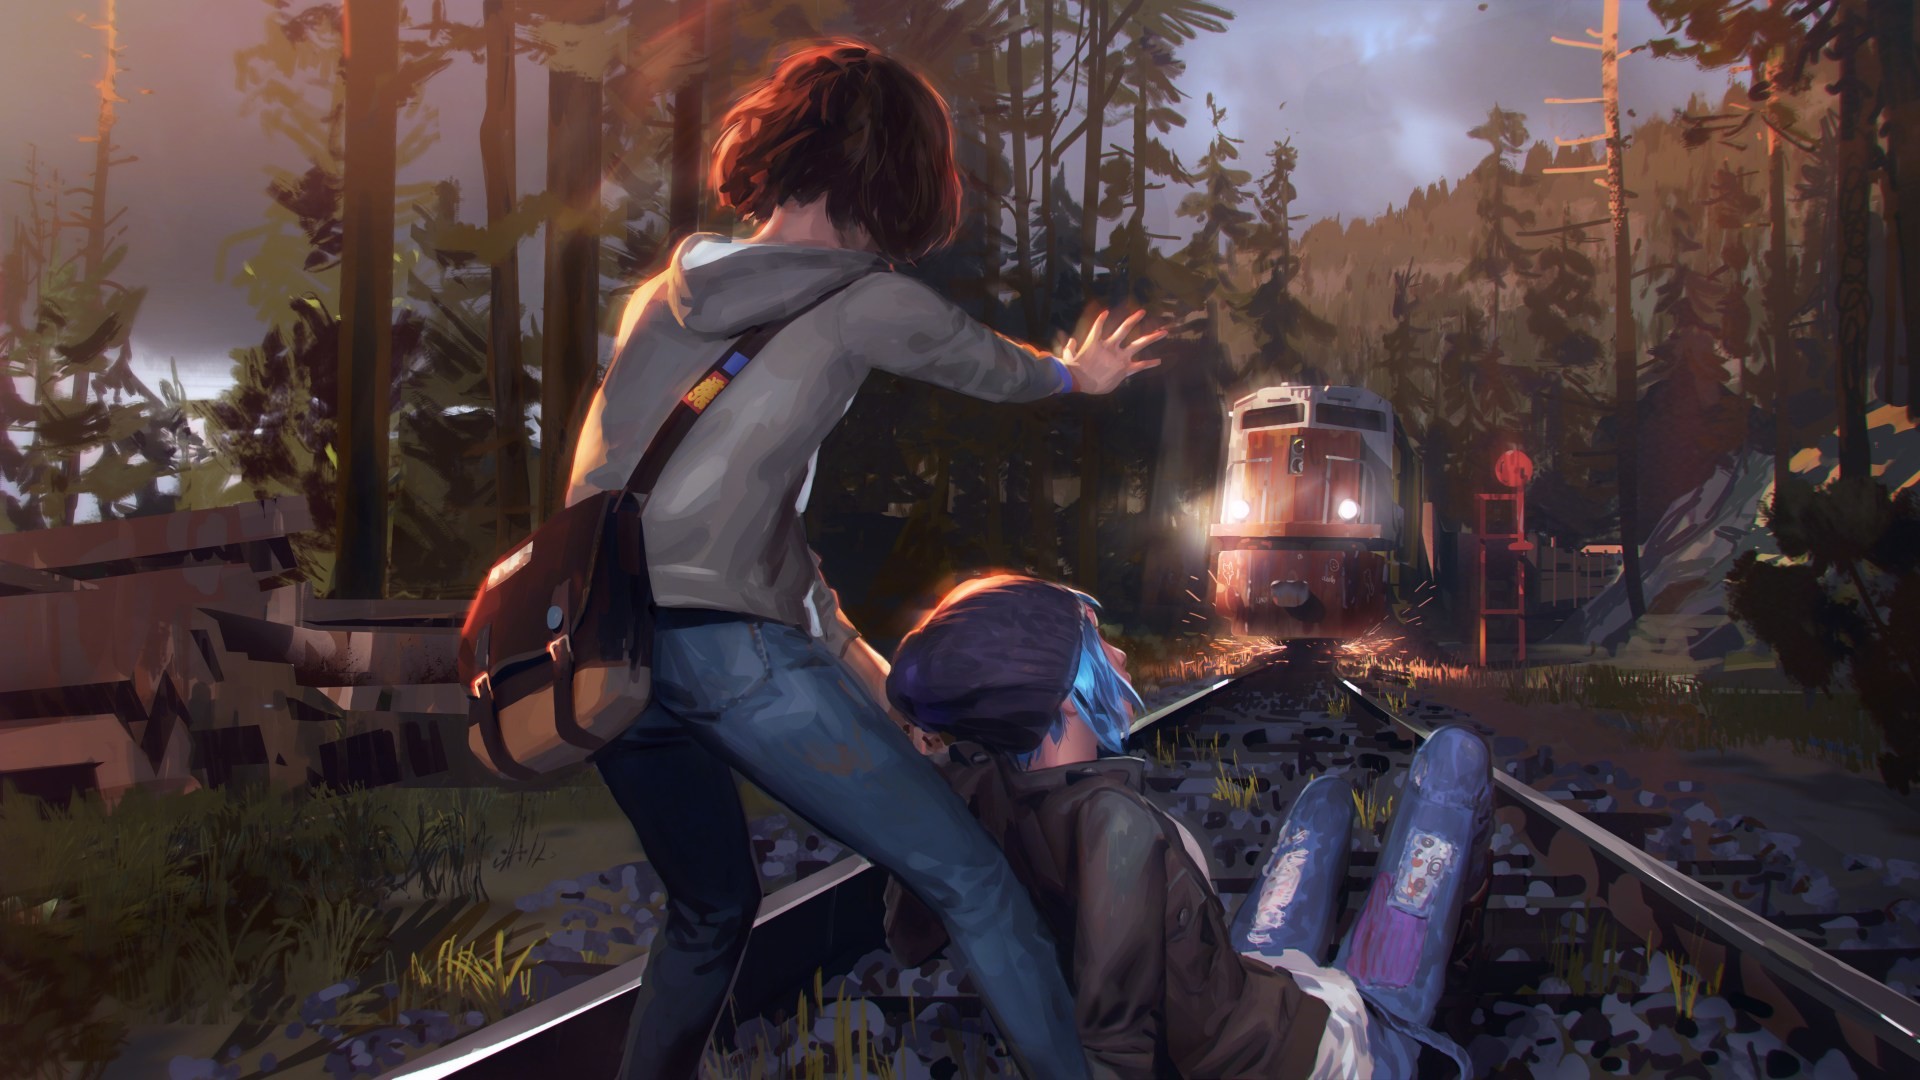 1920x1080 Excellent HD Quality Wallpaper's Collection: Life Is Strange